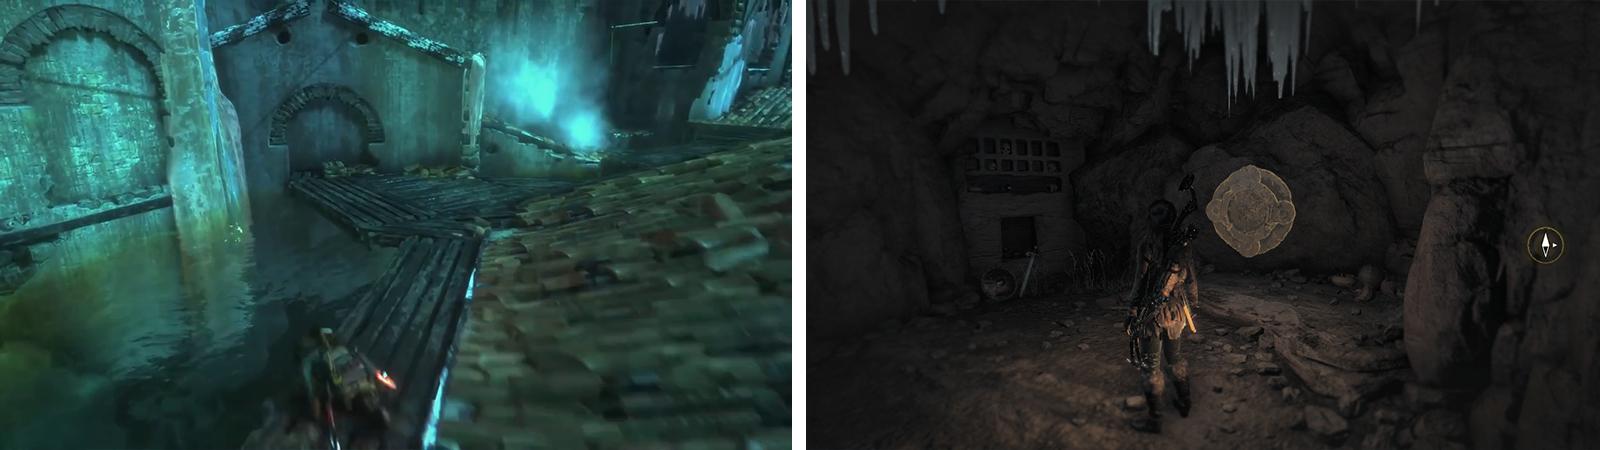 Enter the water beneath the trebuchet (left) to find an underwater entrance to a Crypt. Inside you’ll find Mural 02 (right).